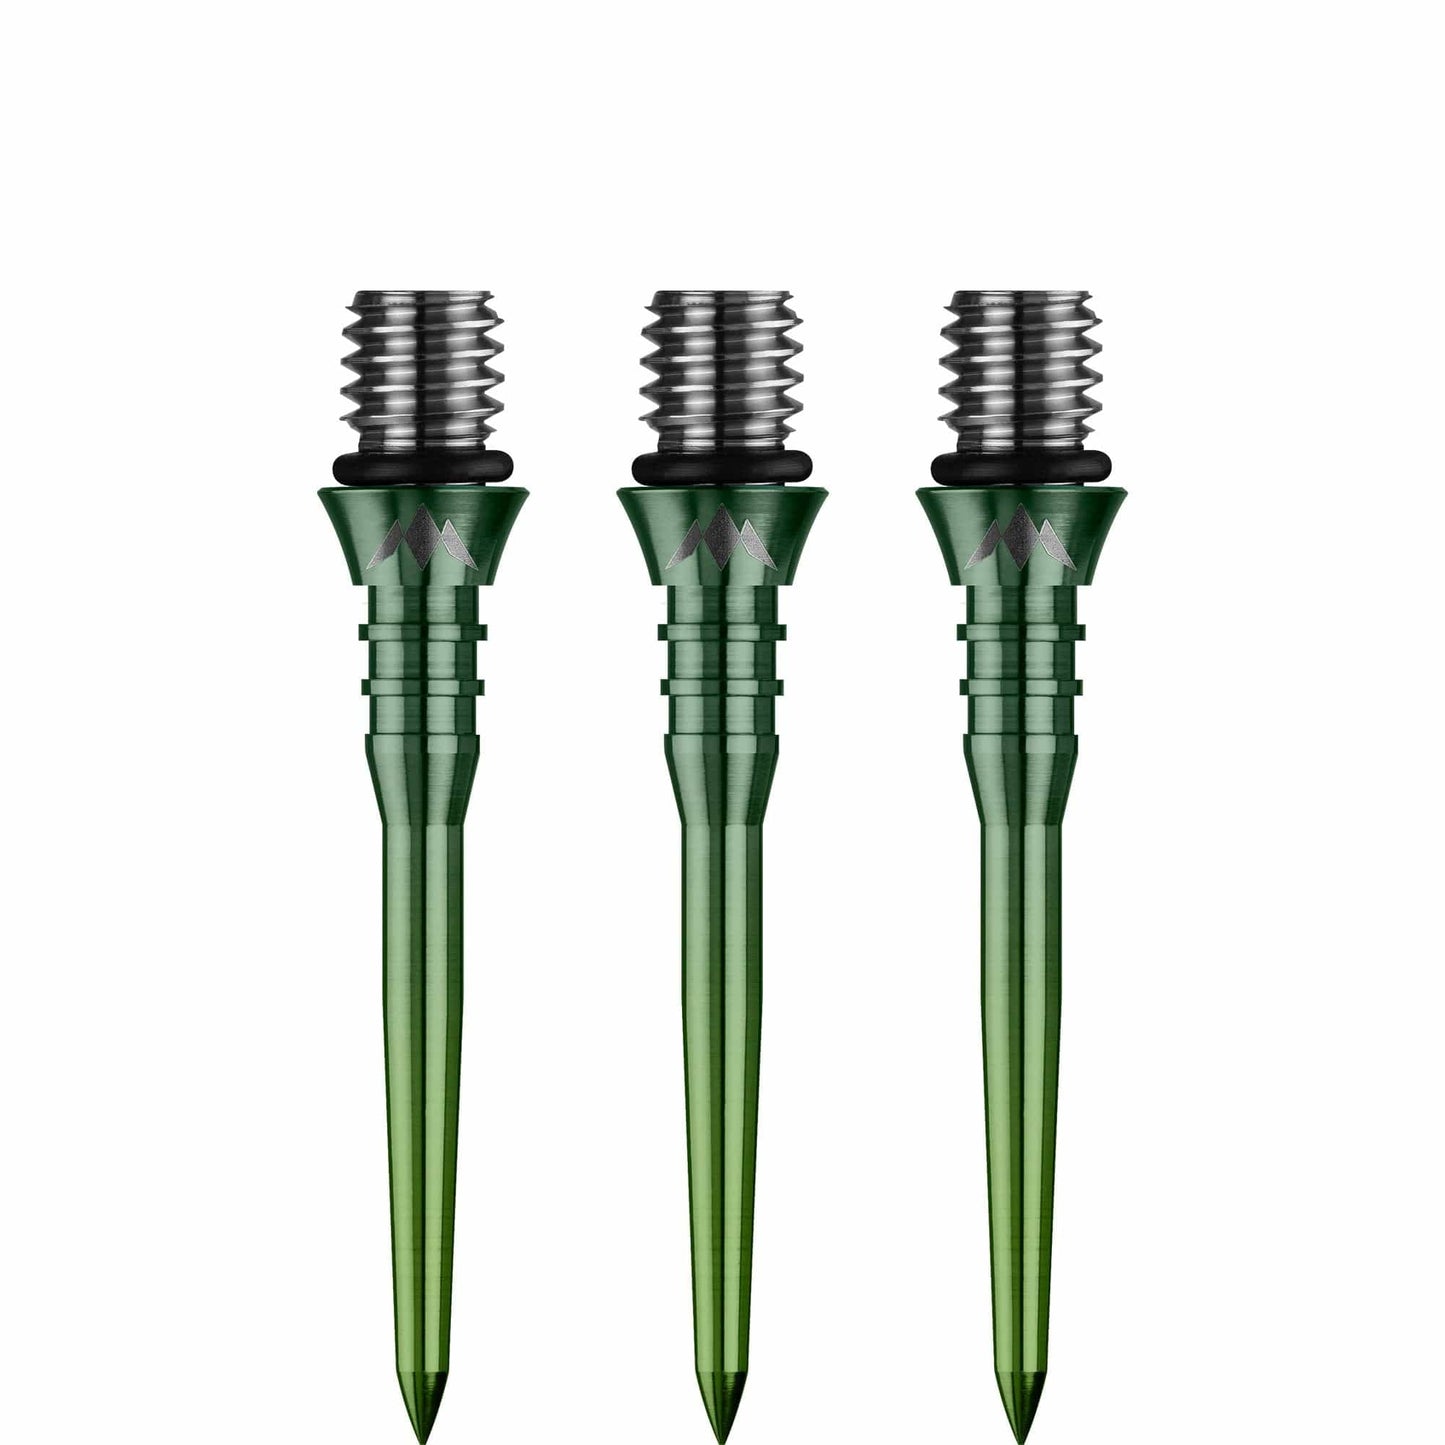 Mission Titan Pro Ti Conversion Points - Grooved - Gradient Green 26mm